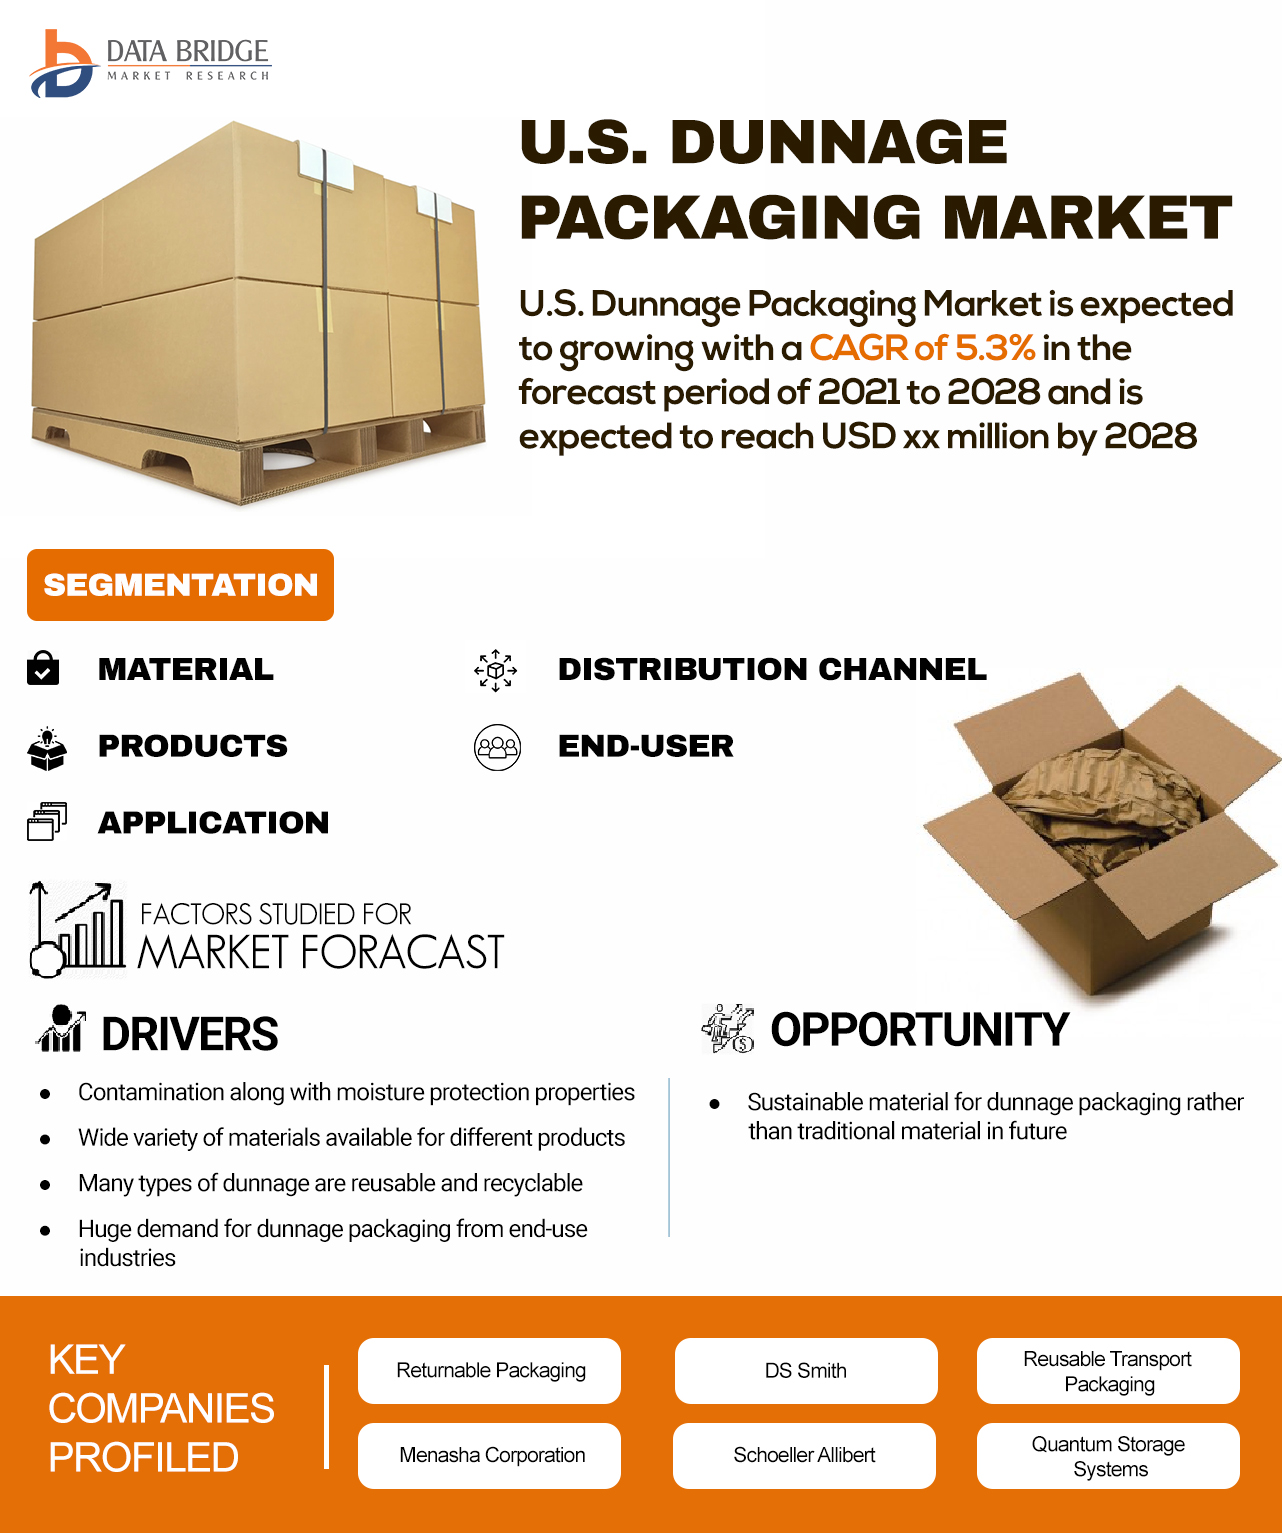 U.S. Dunnage Packaging Market